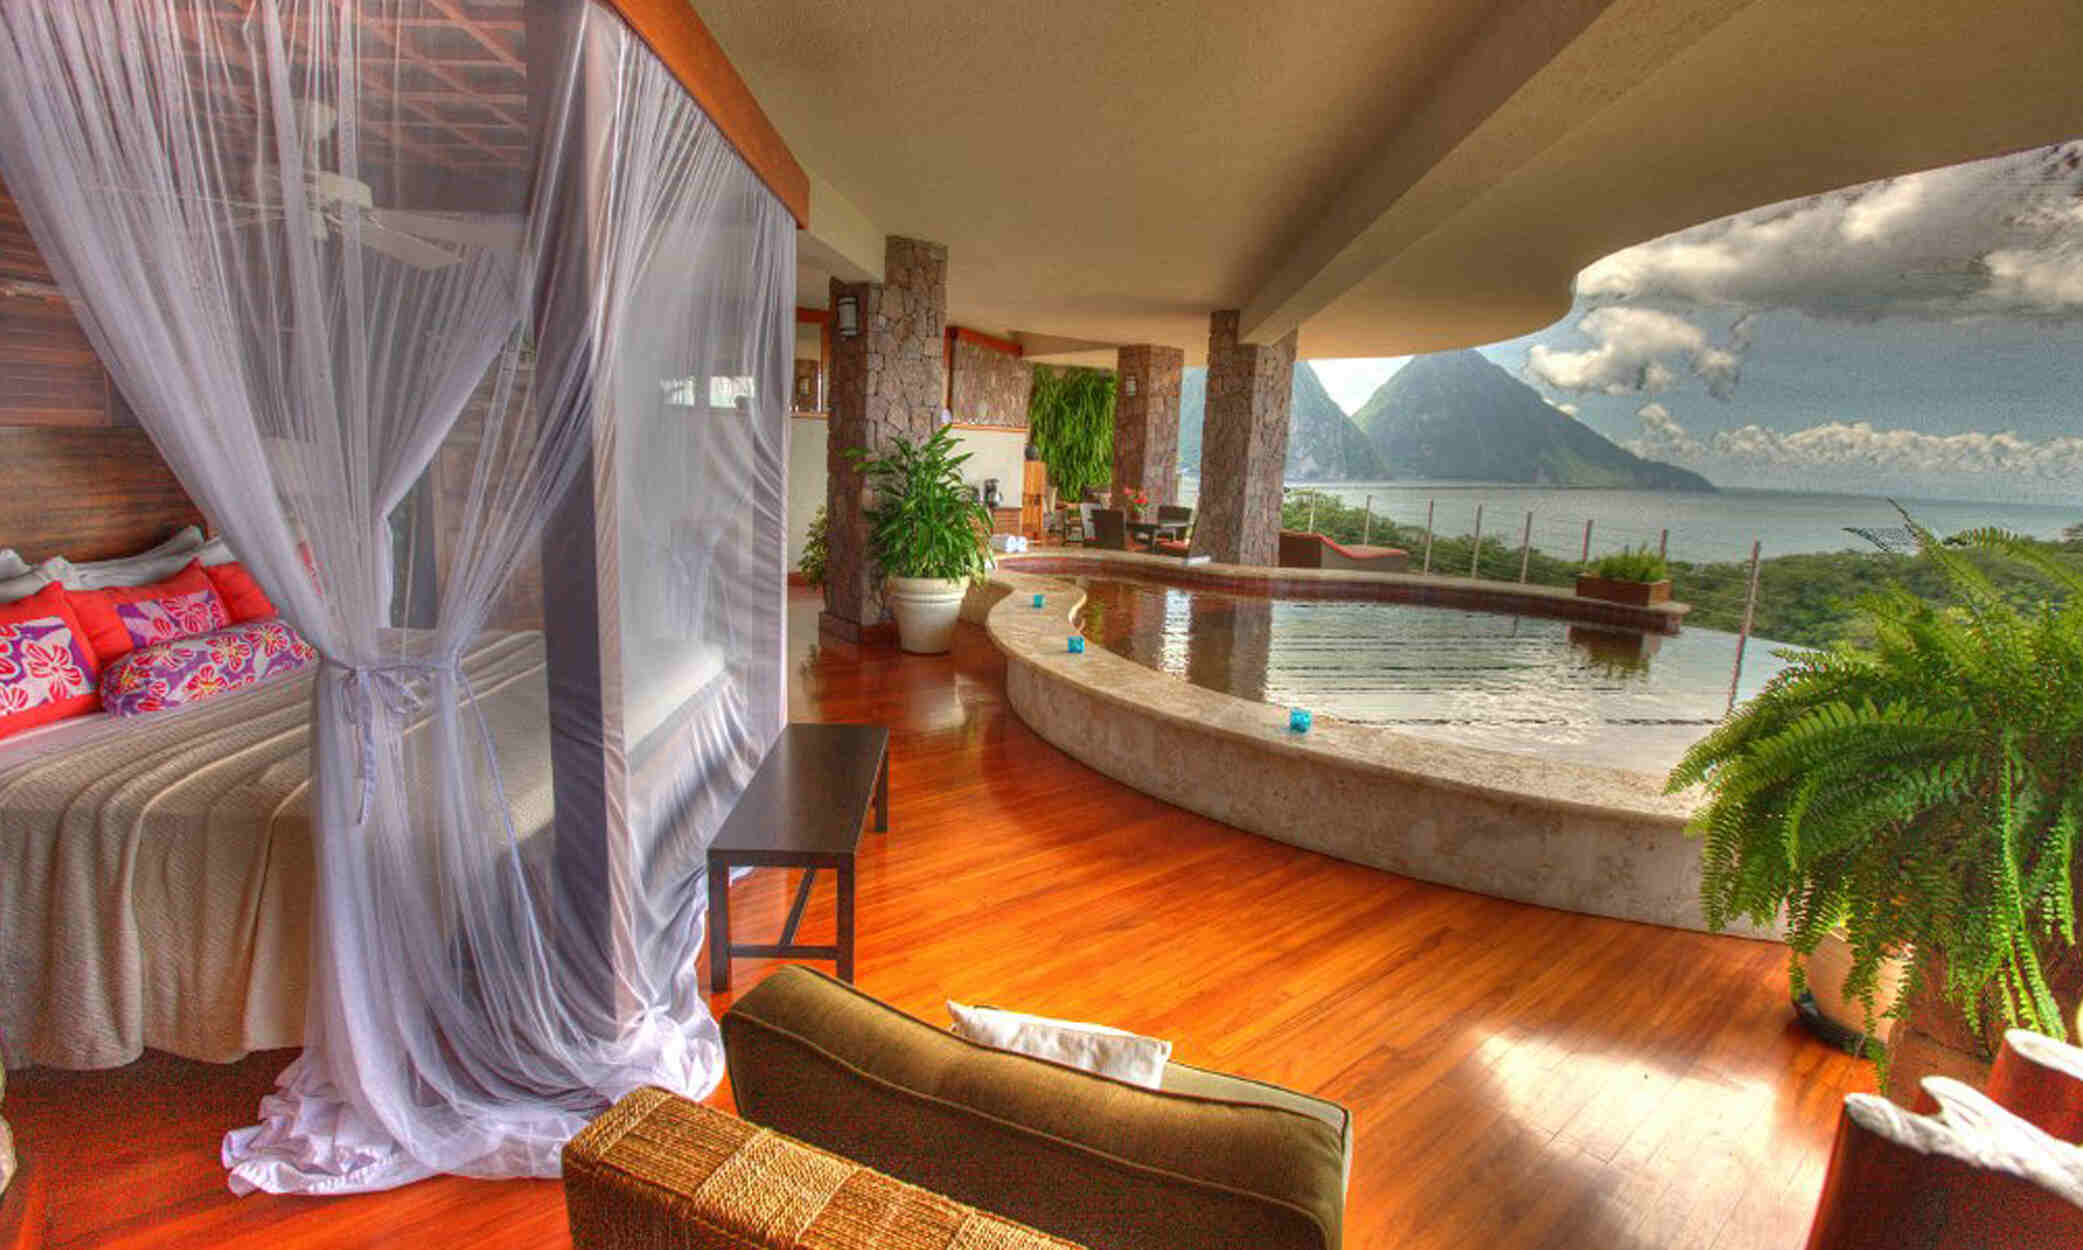 The best luxury resorts in St Lucia include Jade Mountain.